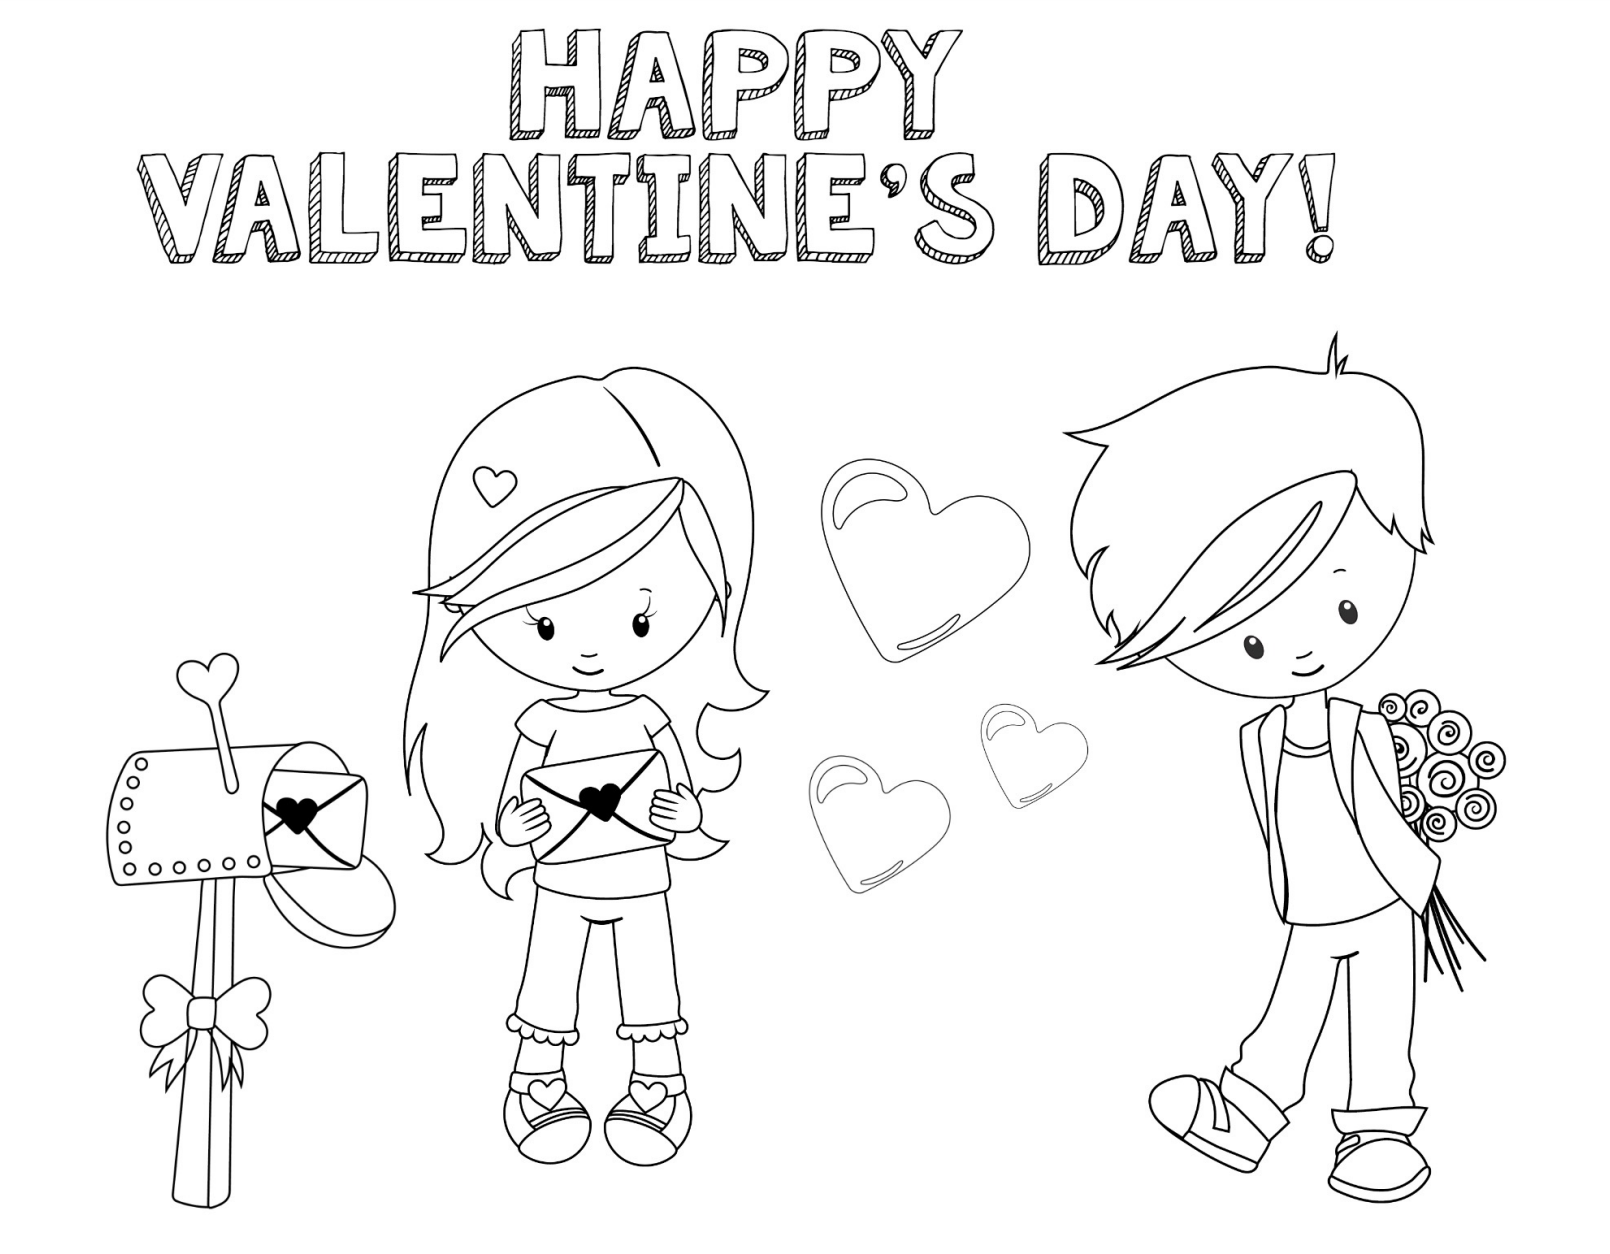 Cute valentines day coloring pages for kids